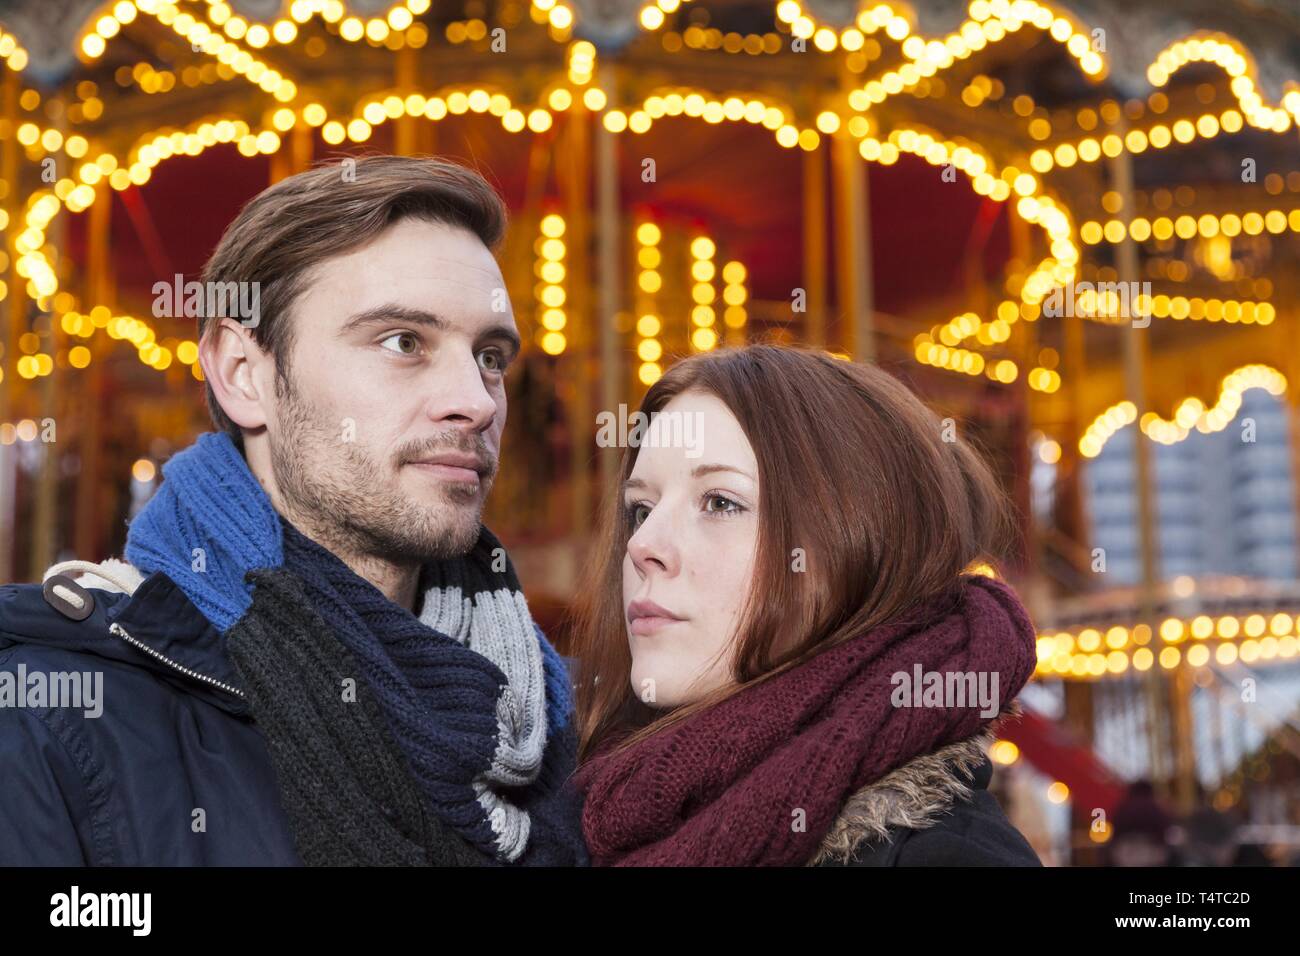 A couple doesn't look in each others eyes, Christmas Market, Germany, Europe Stock Photo